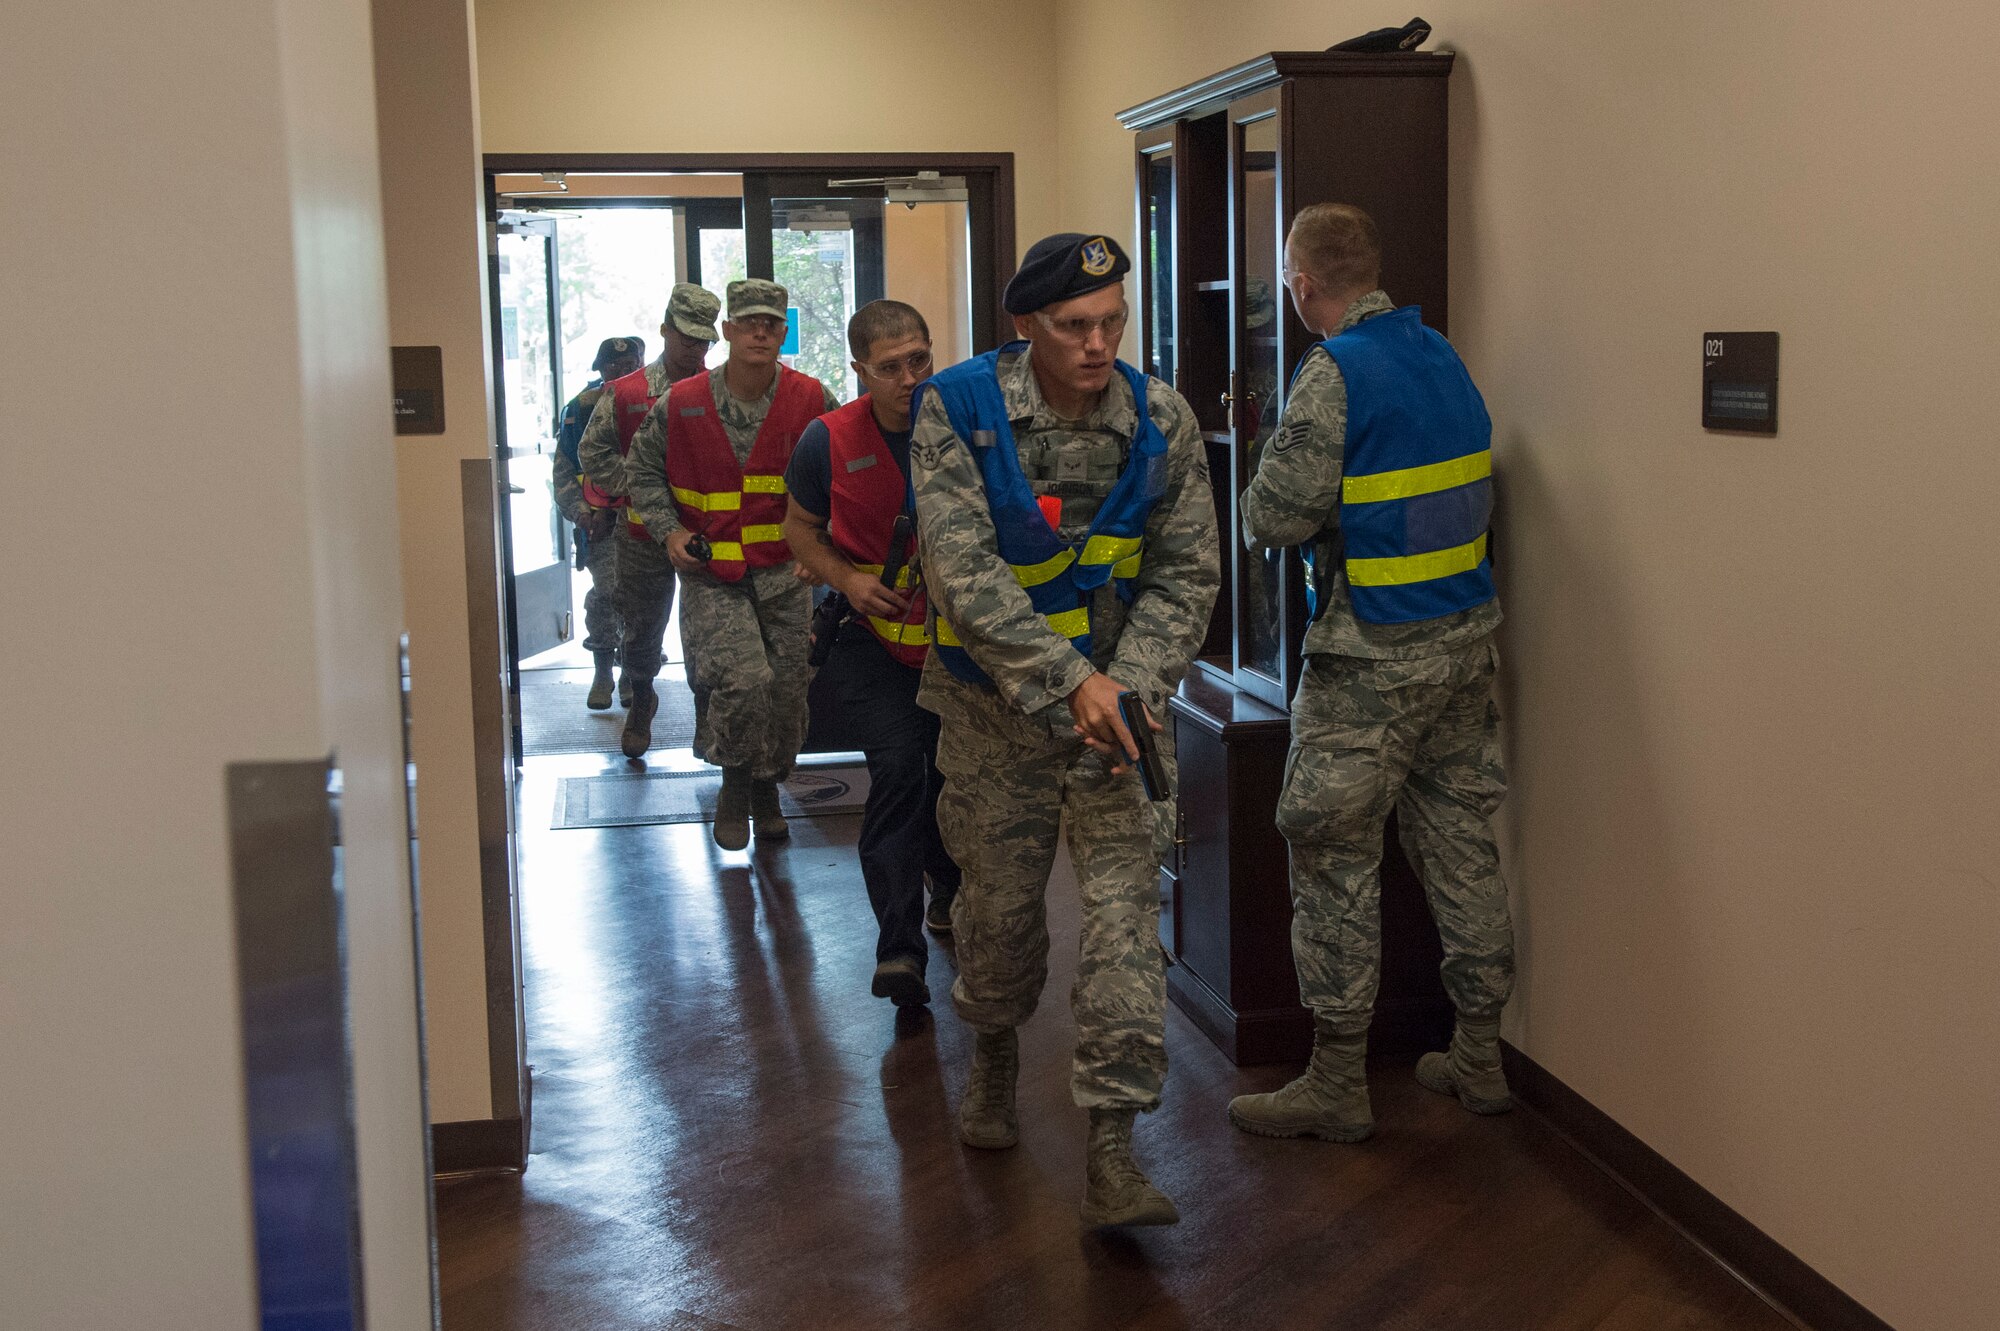 Members of the 97th Security Forces Squadron escort Altus Air Force Base fire fighters to aid the victims of an active shooter, during Advanced Law Enforcement Rapid Response Training, June 19, 2018, at Altus AFB, Okla.